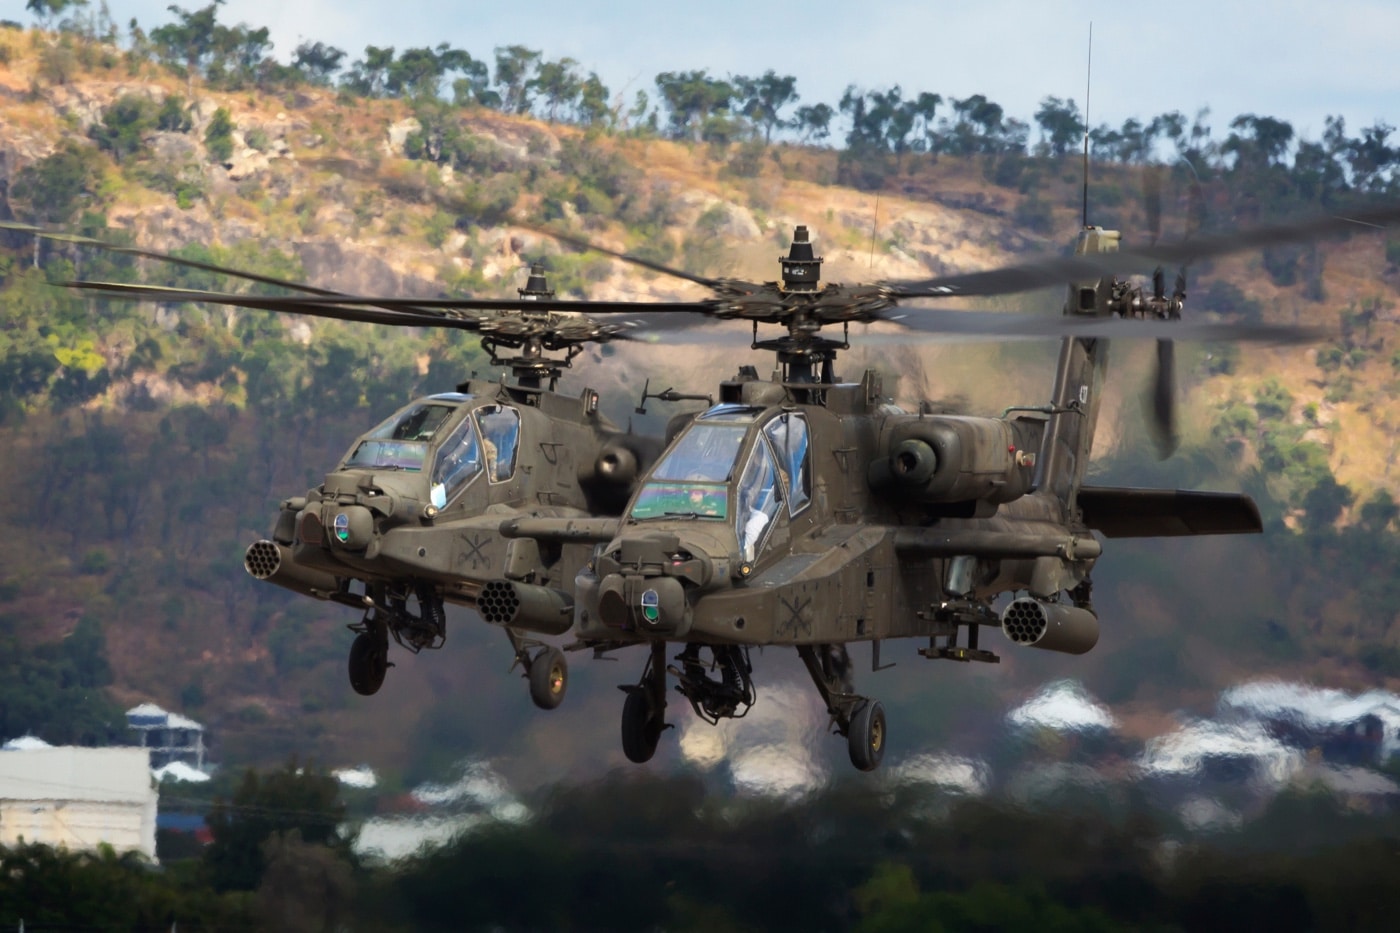 boeing ah-64 apache helicopters in flight